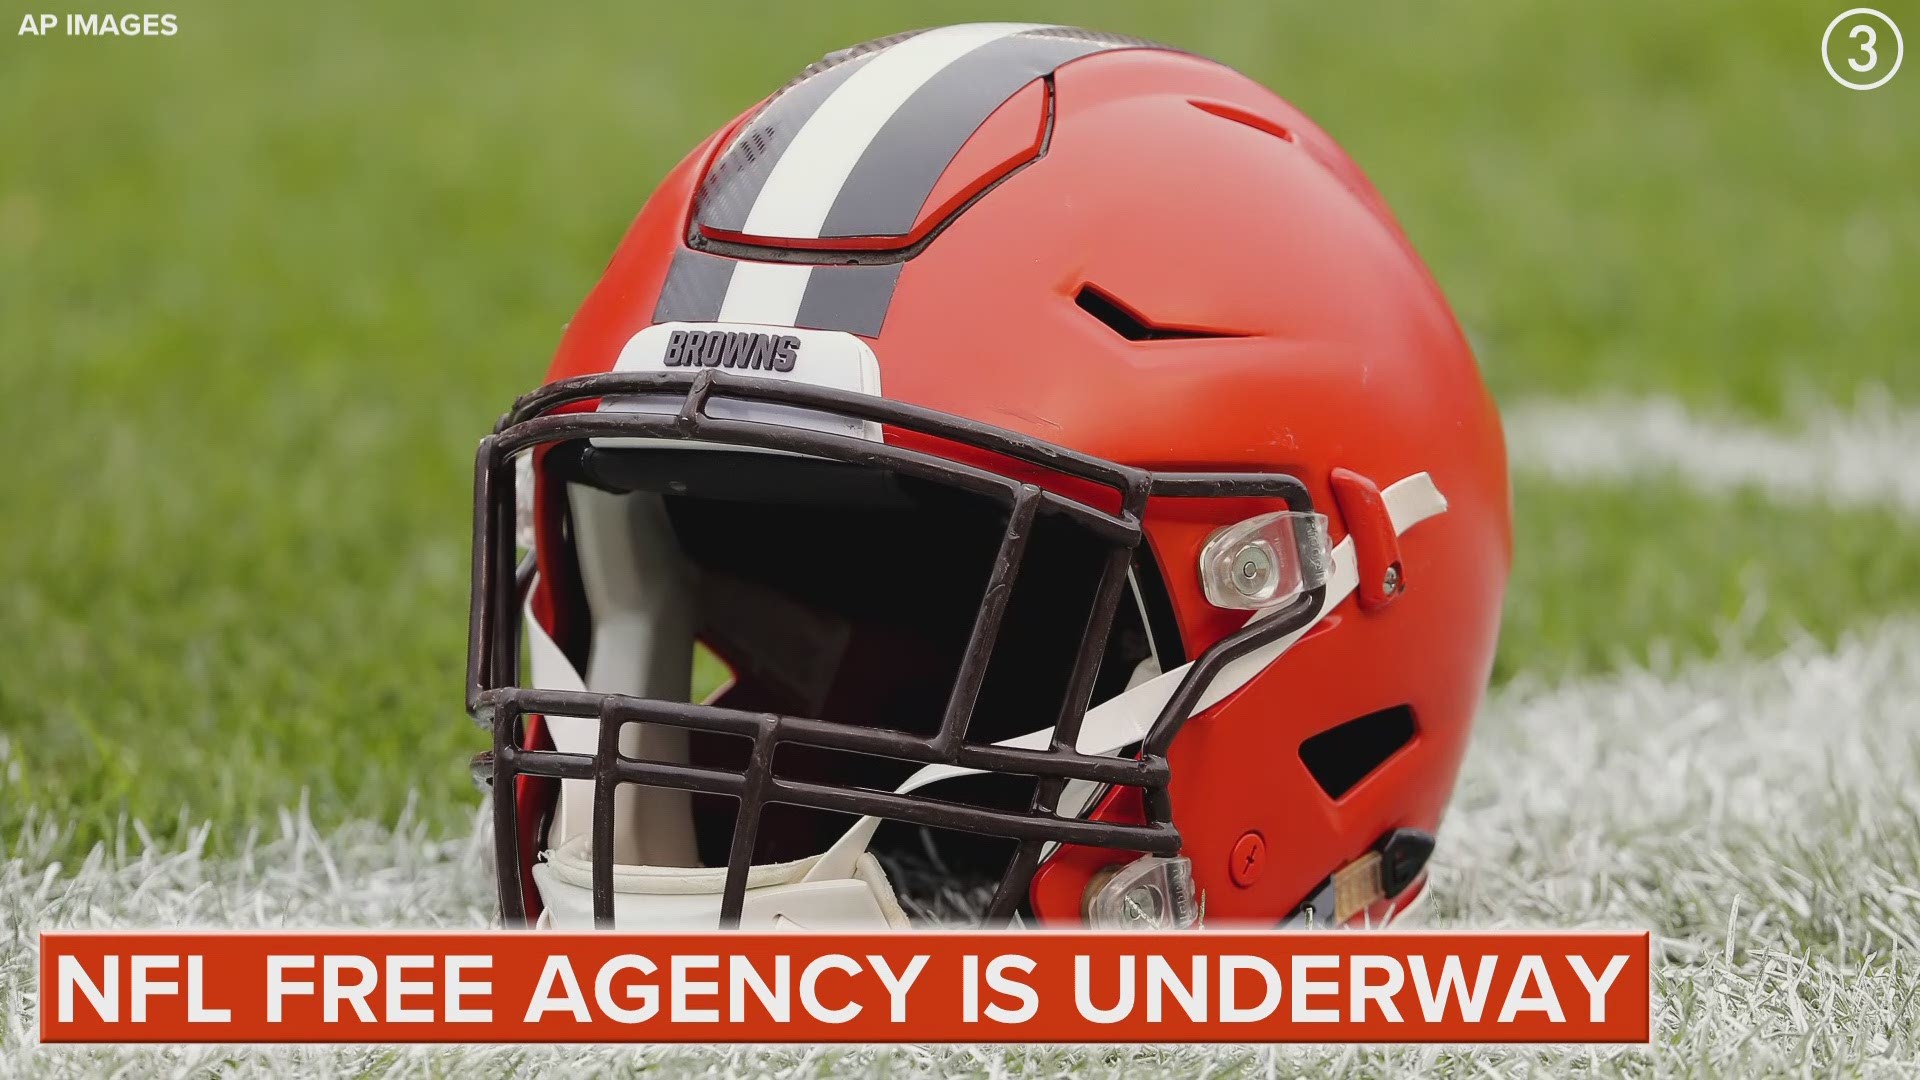 how can i watch the browns game today for free